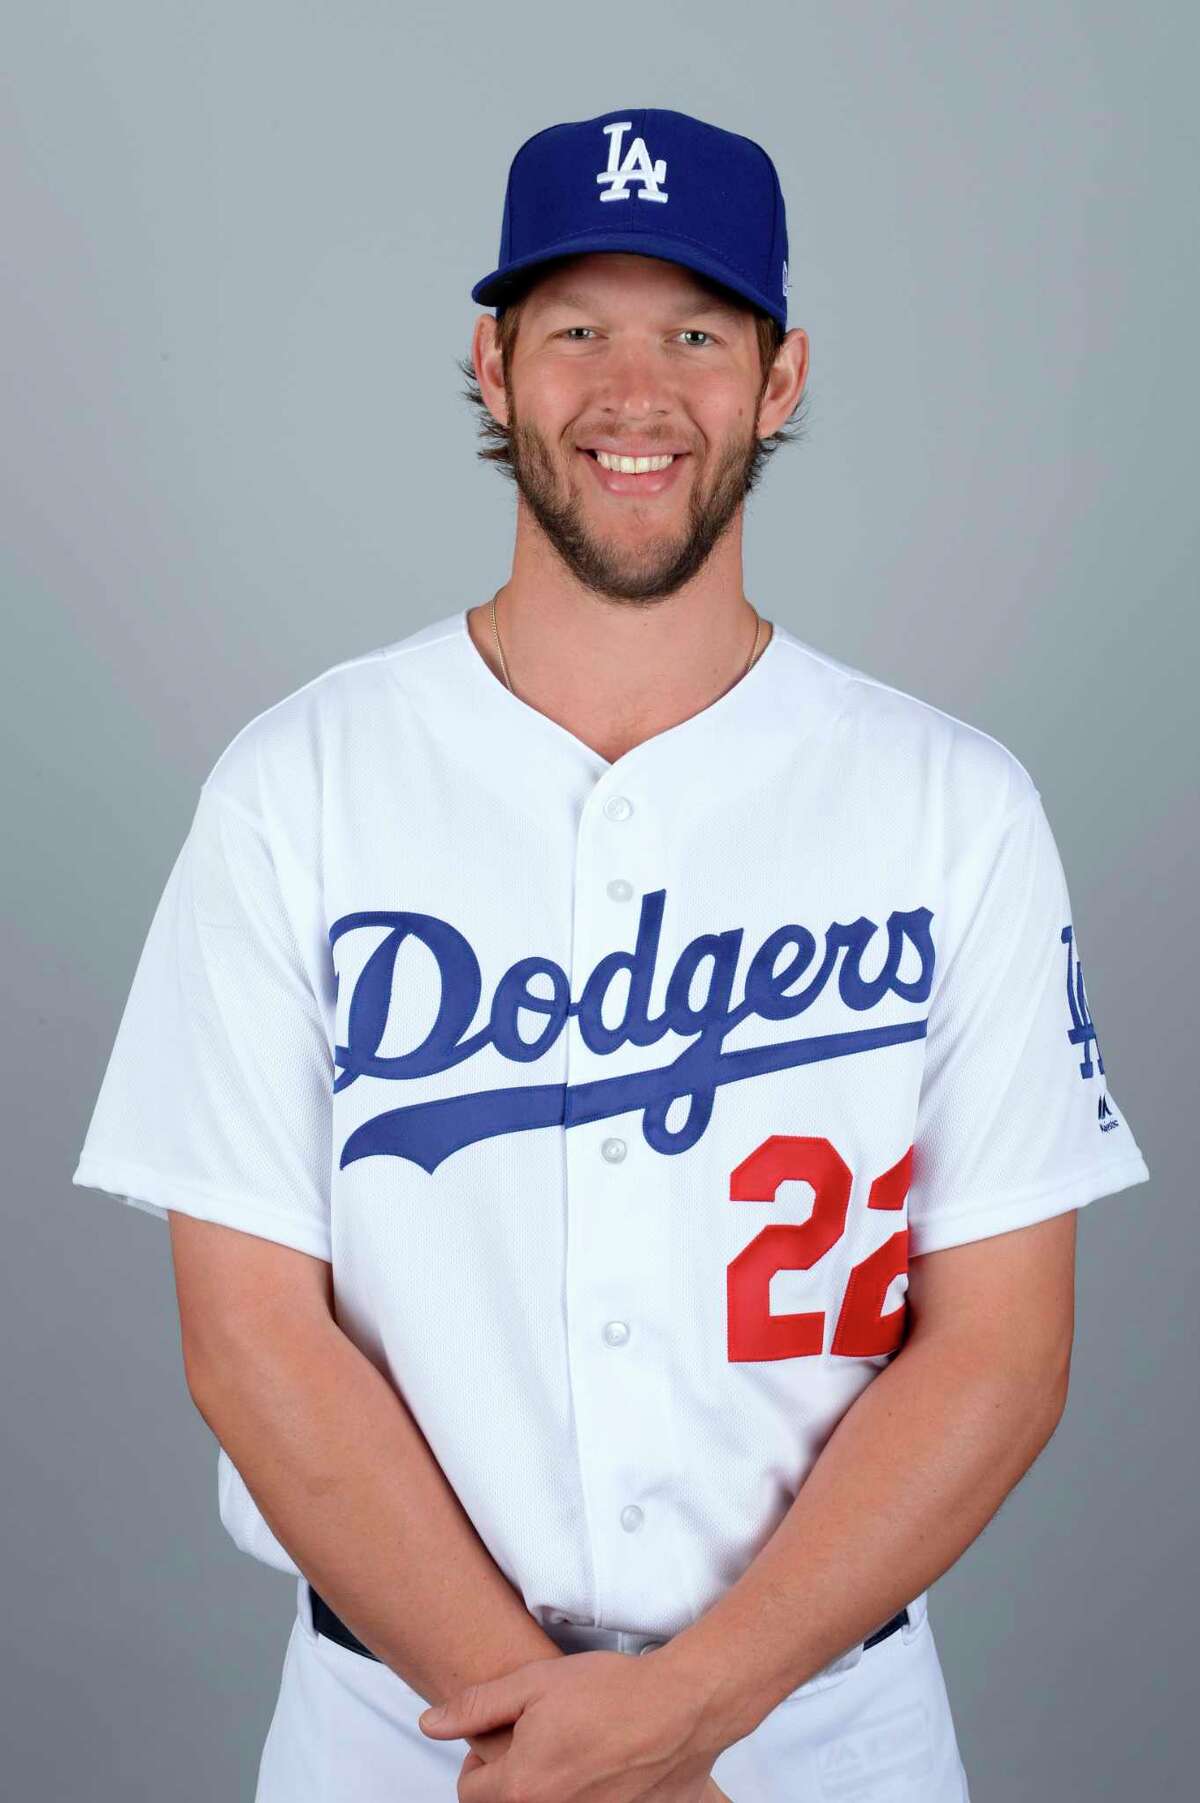 GLENDALE, AZ - FEBRUARY 24: Clayton Kershaw #22 of the Los Angeles Dodgers poses during Photo Day on Friday, February 24, 2017 at Camelback Ranch in Glendale, Arizona. (Photo by Ron Vesely/MLB Photos via Getty Images) *** Local Caption *** Clayton Kershaw